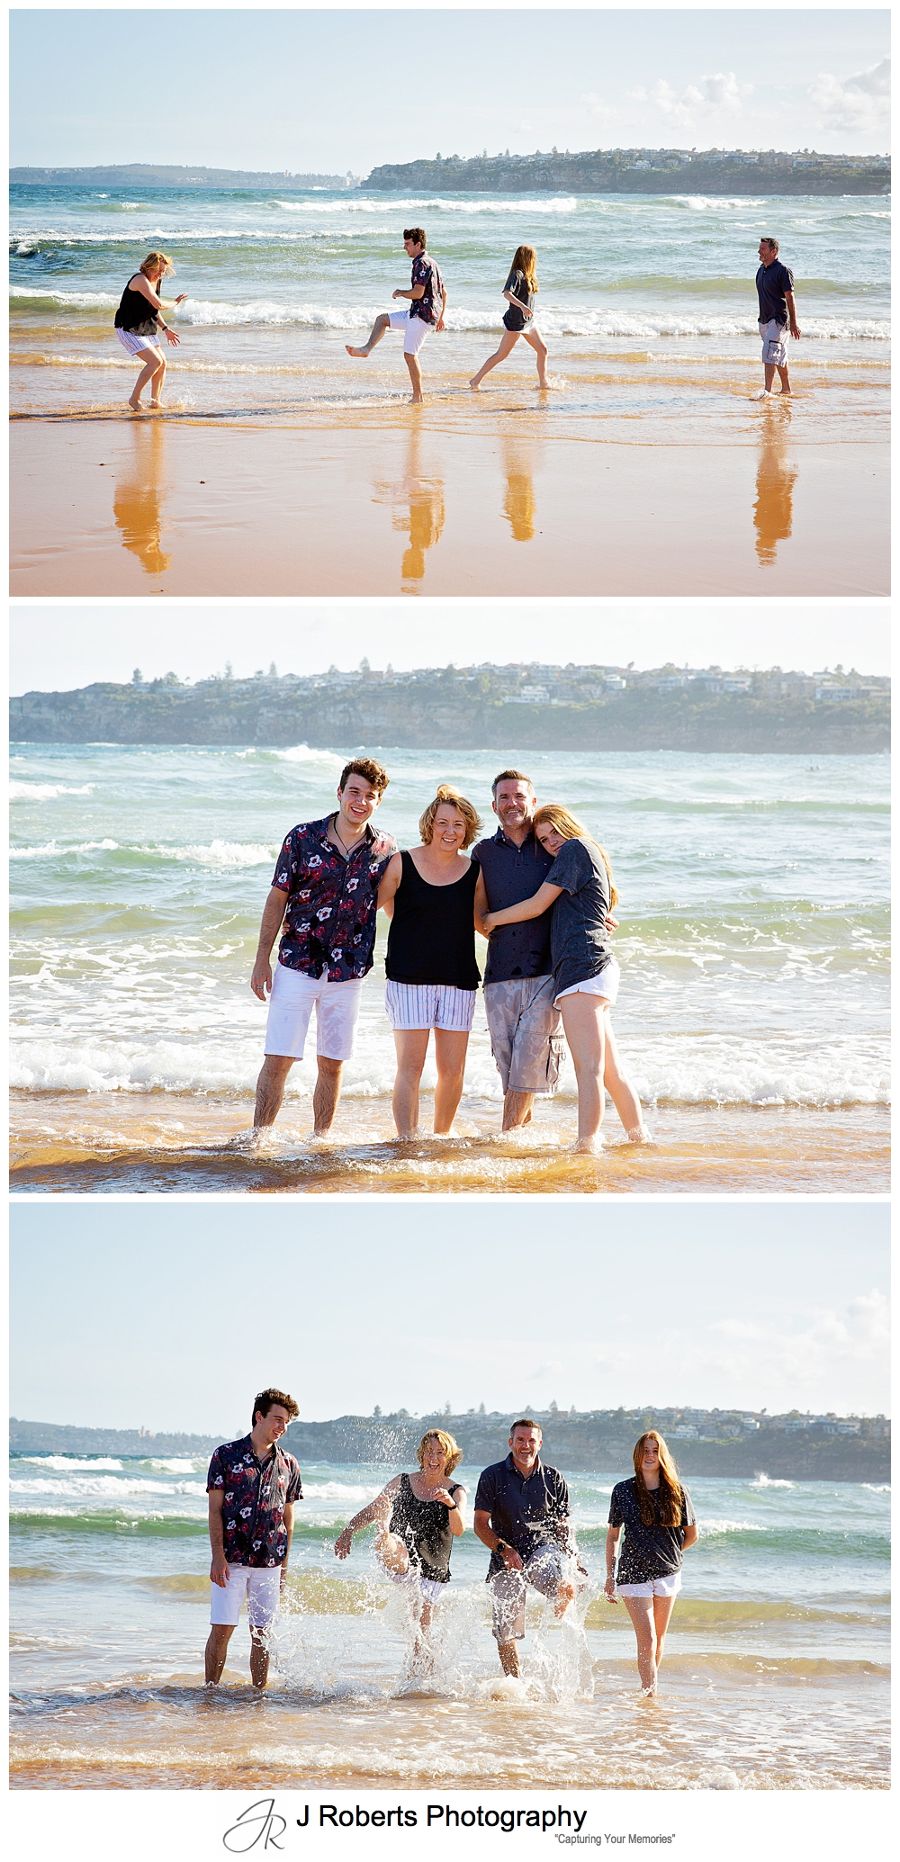 Family portraits with teens before they fly the coop with family fun at the beach